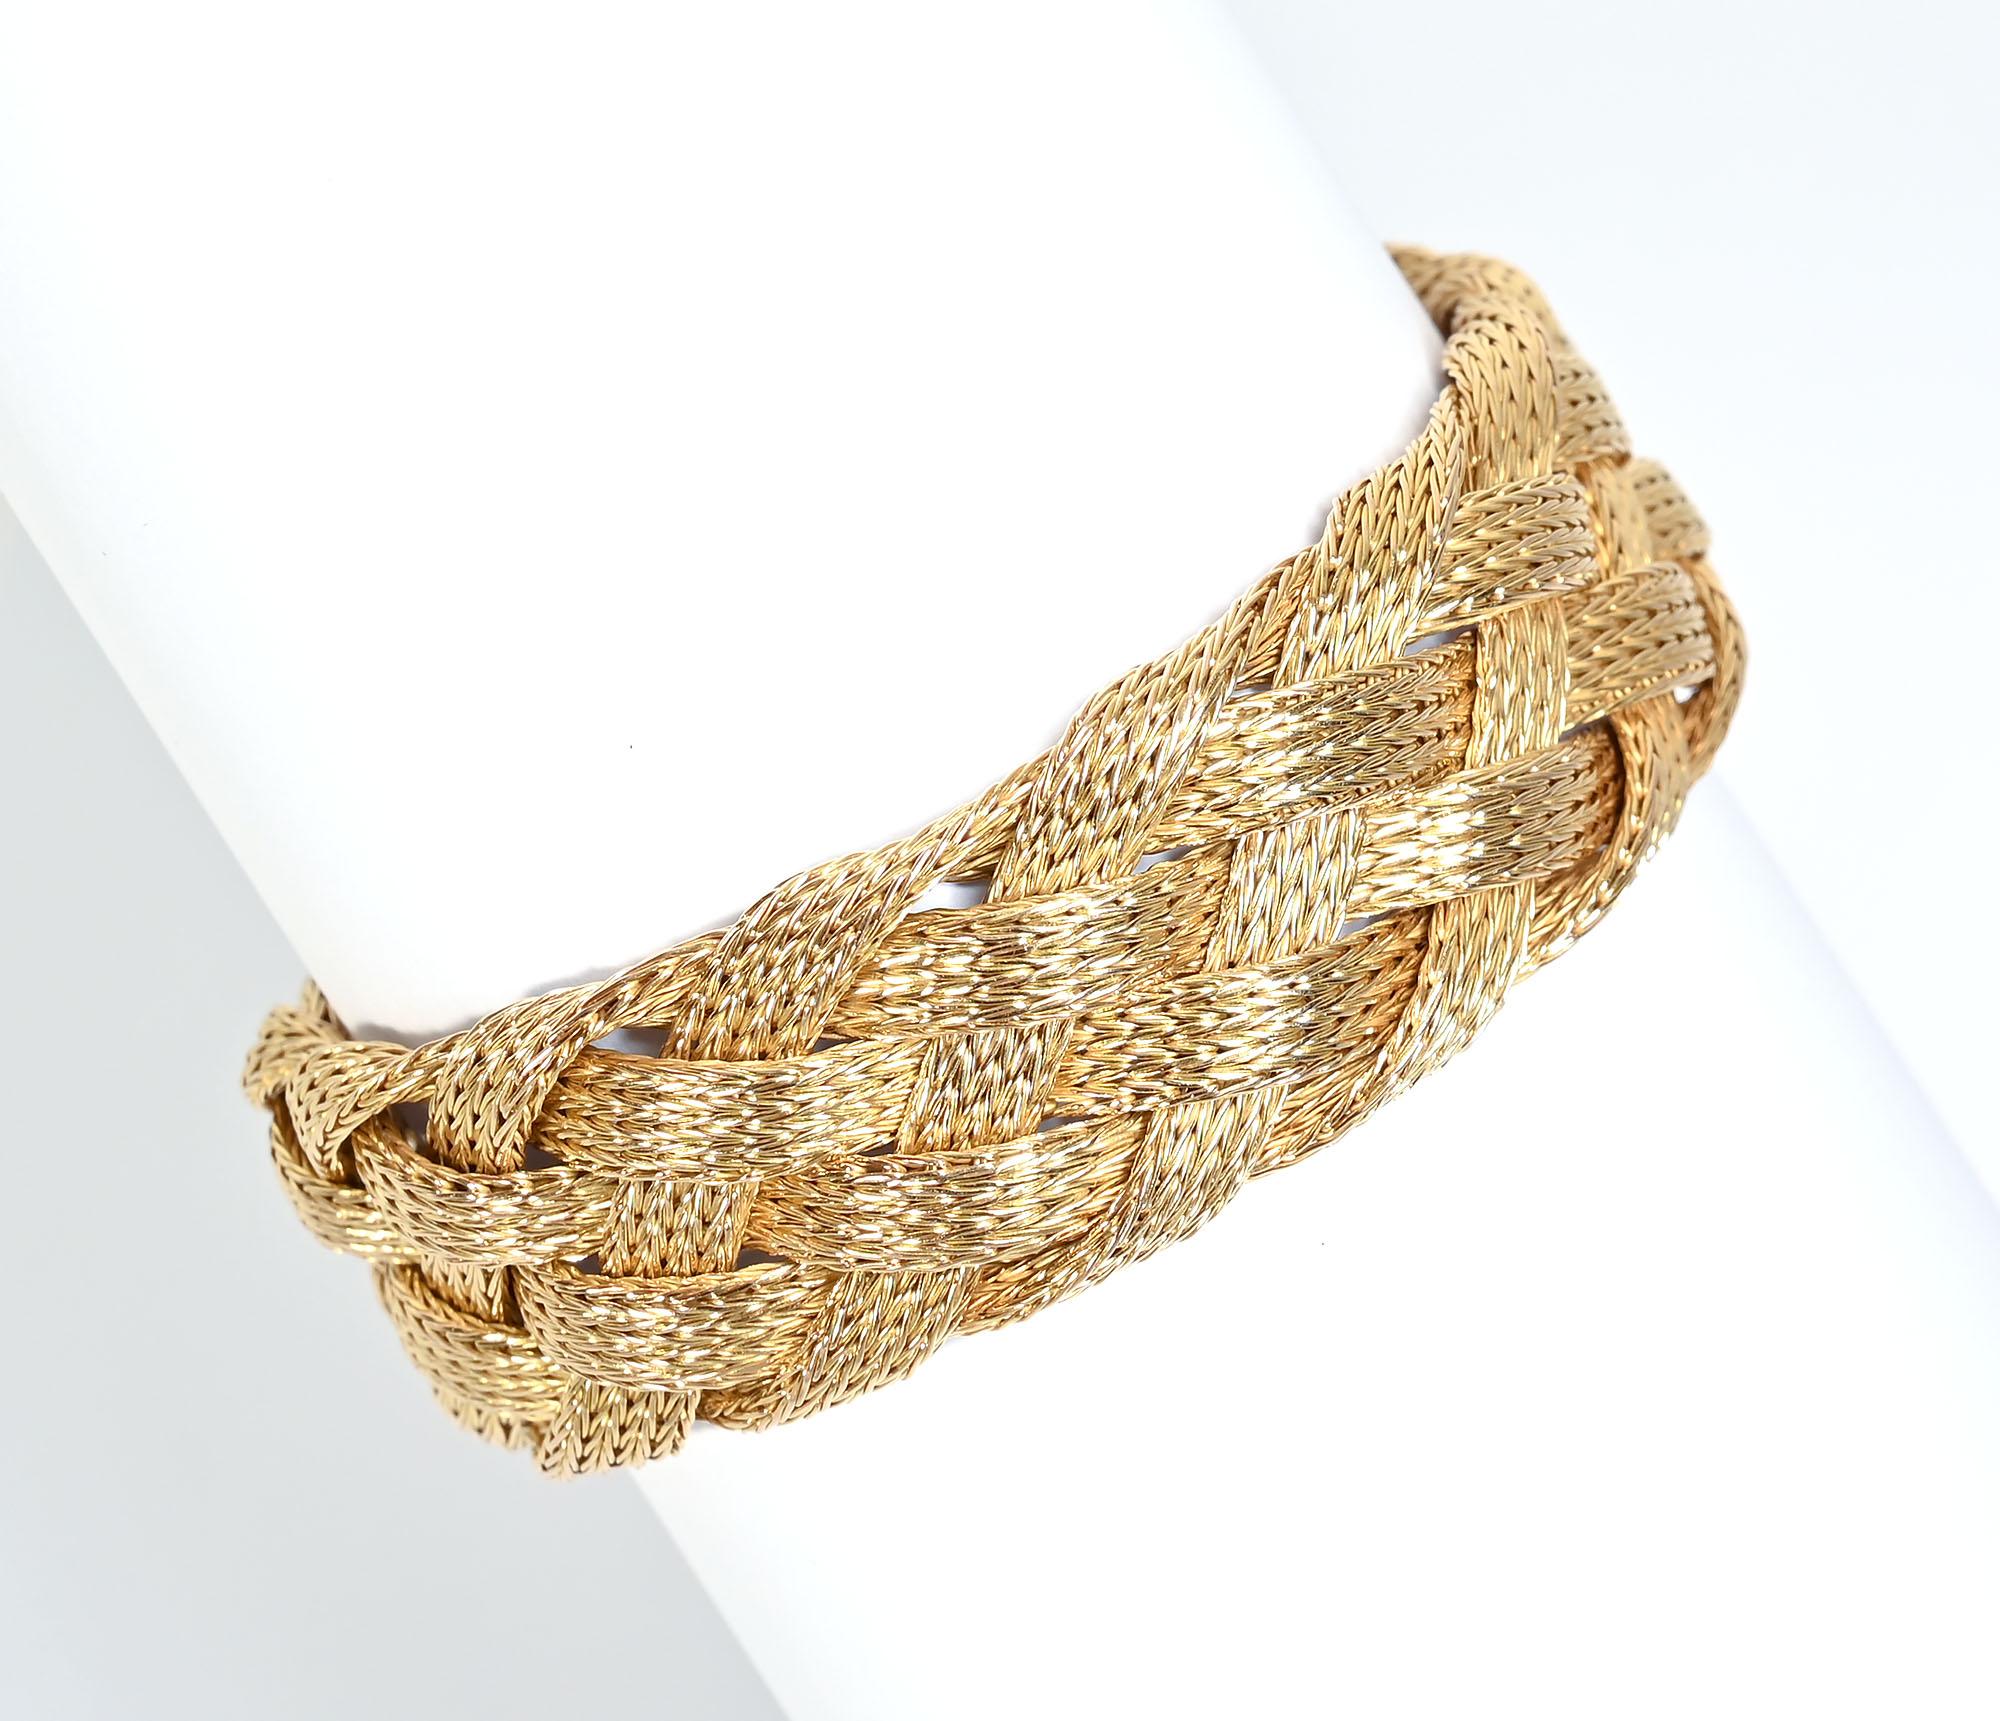 Exquisitely made 18 karat braided bracelet. There are four woven strands, each of which is made of very finely made woven V's. Only with magnification does one realize the delicacy of weaving for each strand.
The bracelet is 7/8